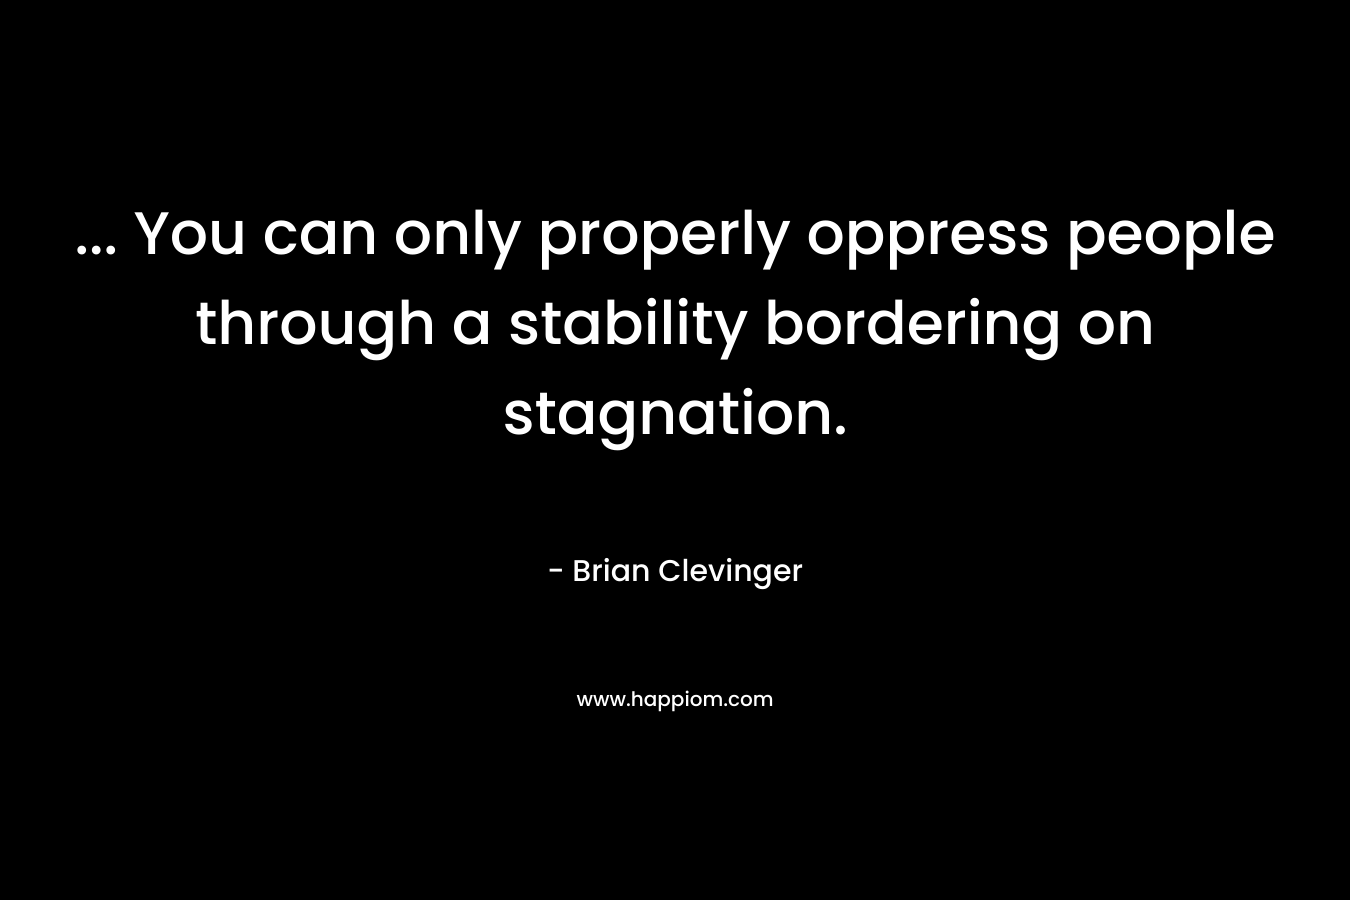 ... You can only properly oppress people through a stability bordering on stagnation.